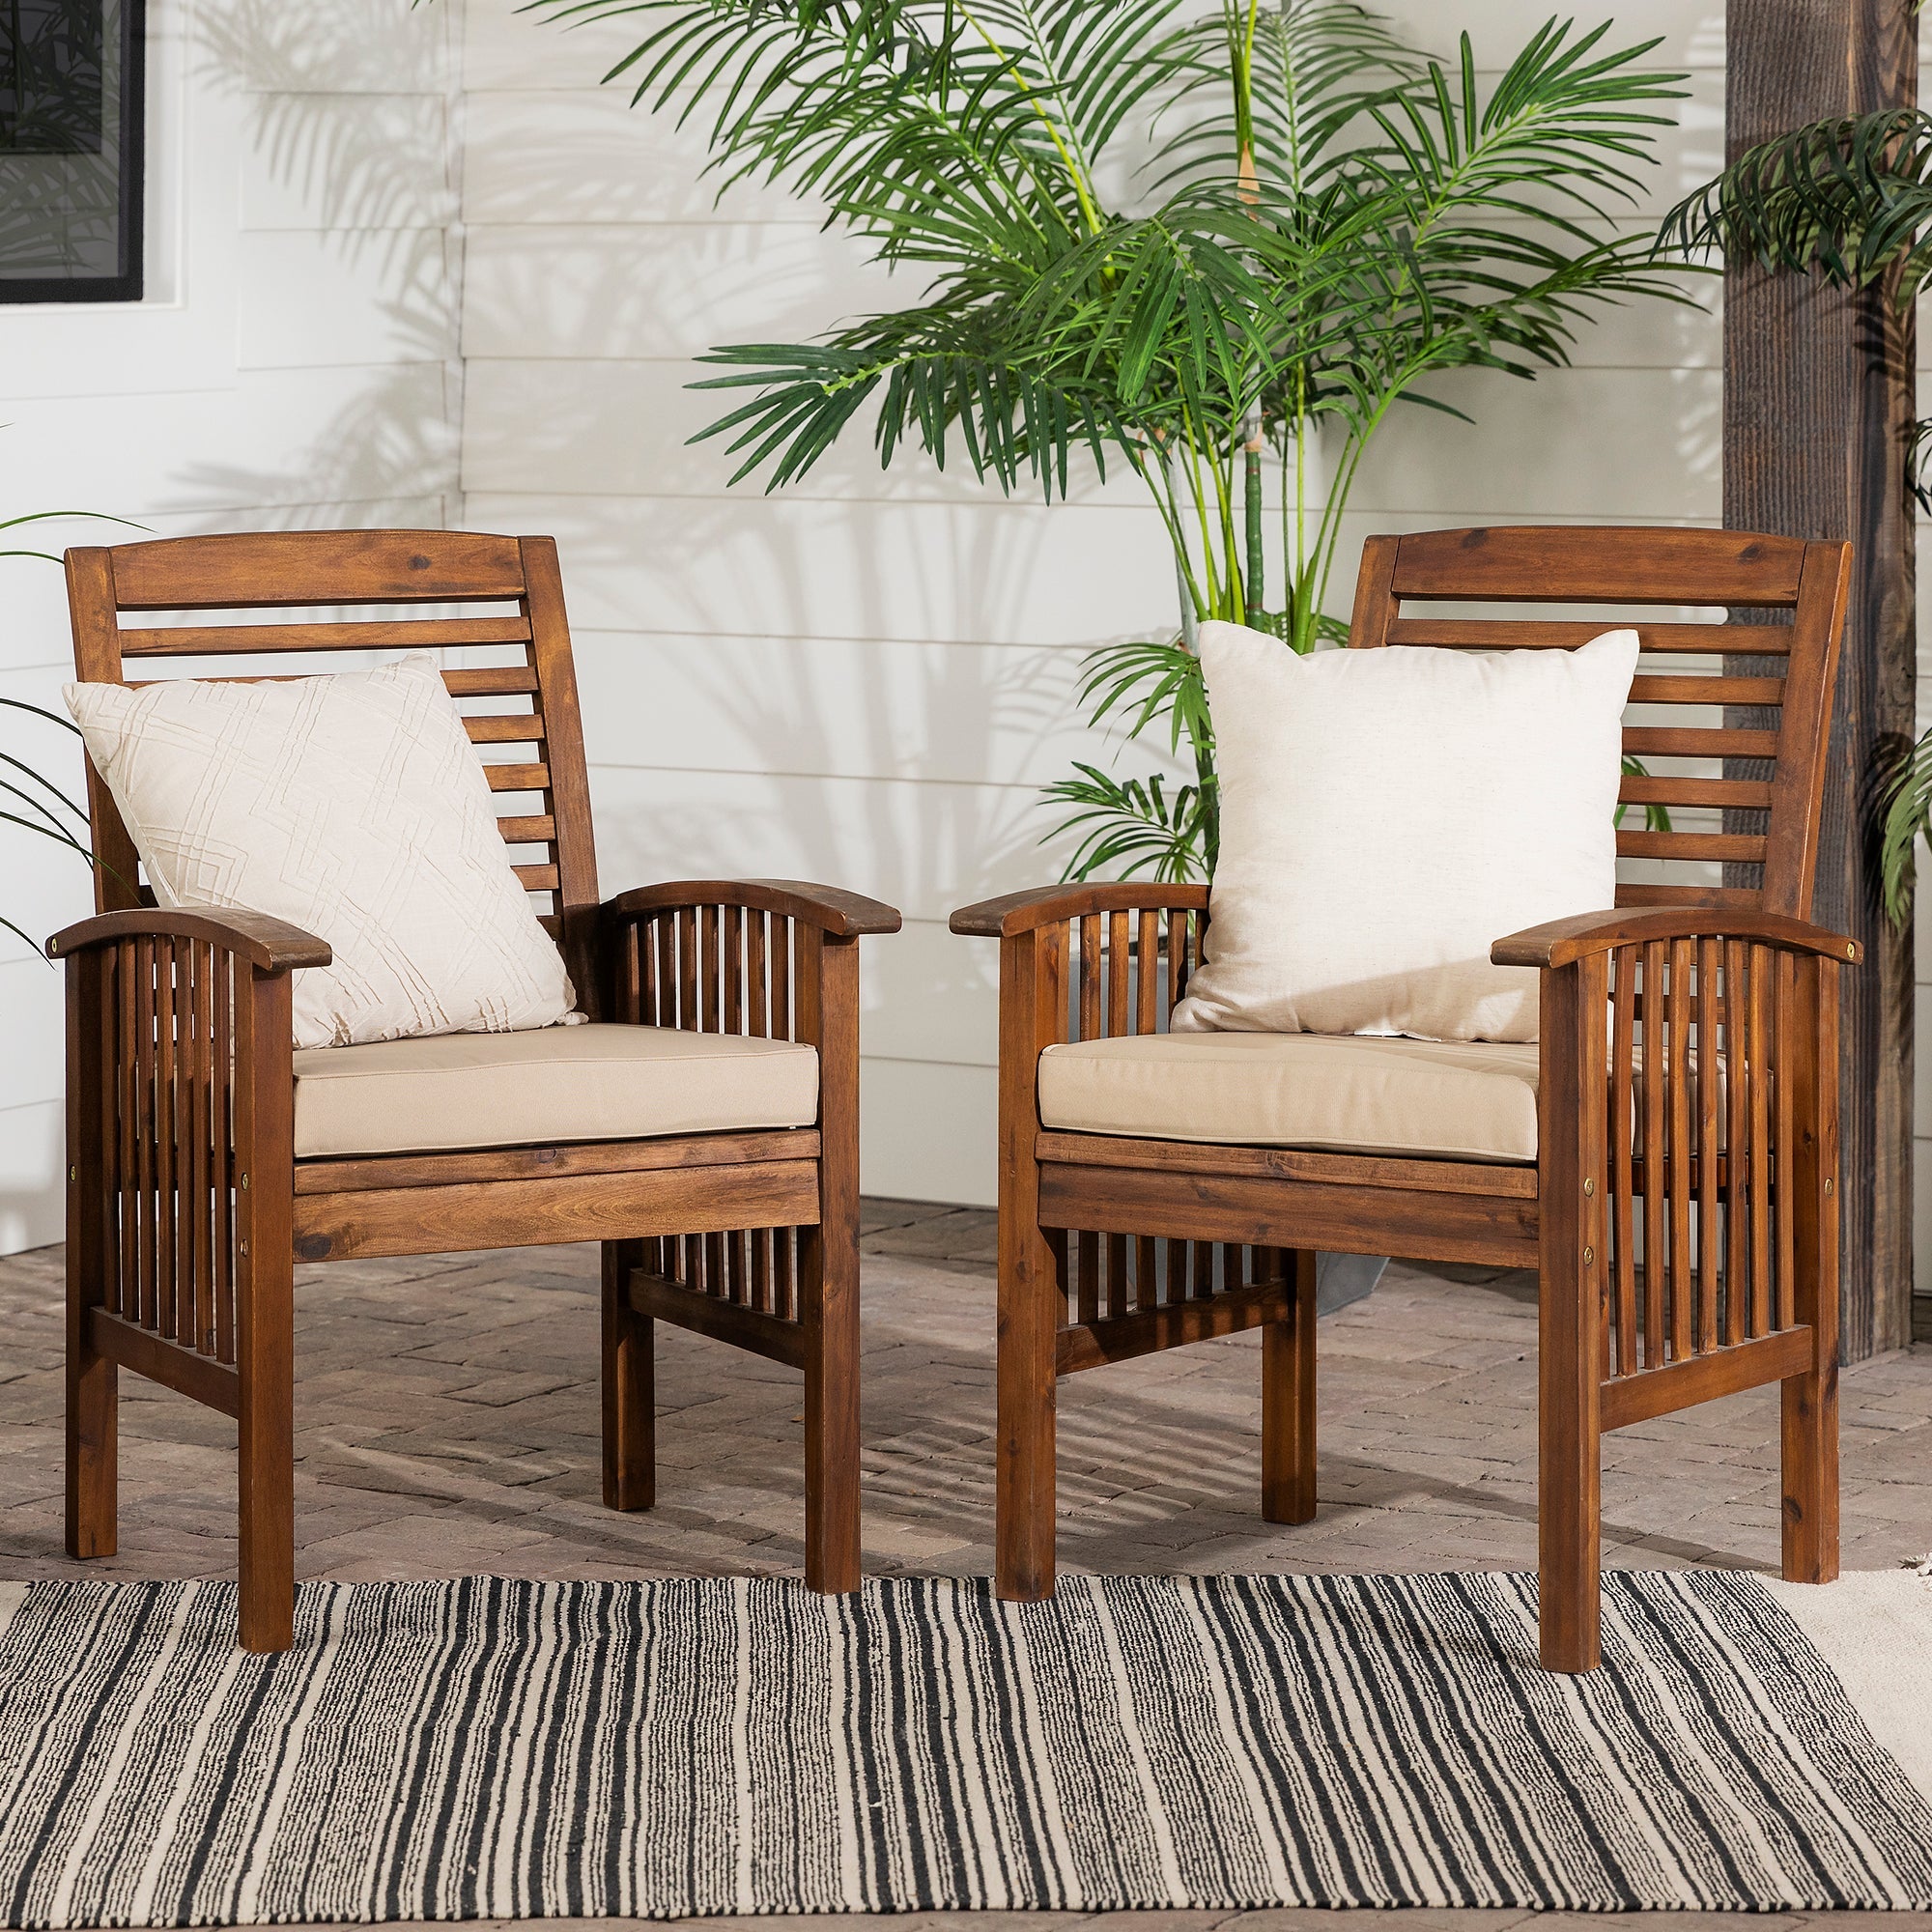 Starlit Slat-Back Patio Chair with Cushions, Set of 2 - Outdoor Patio Chair